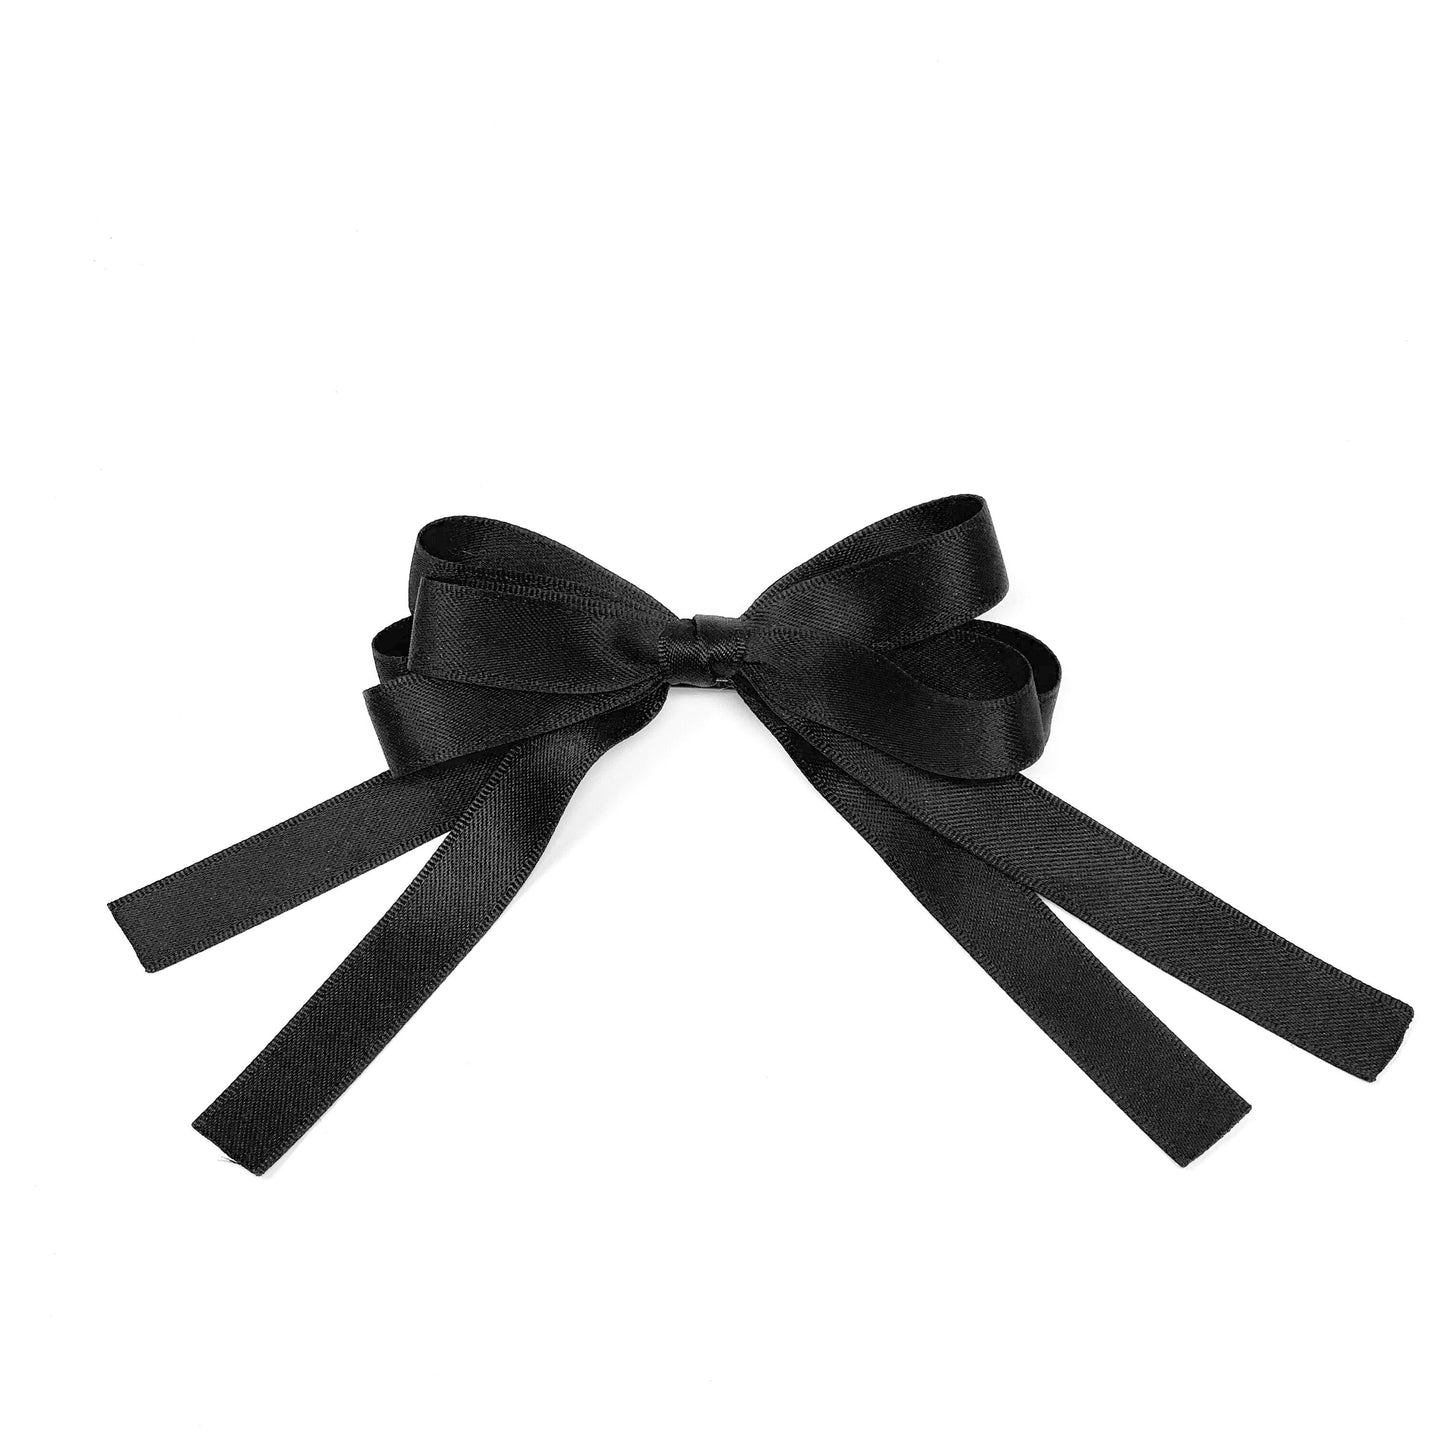 Hair clip with a satin bow in black